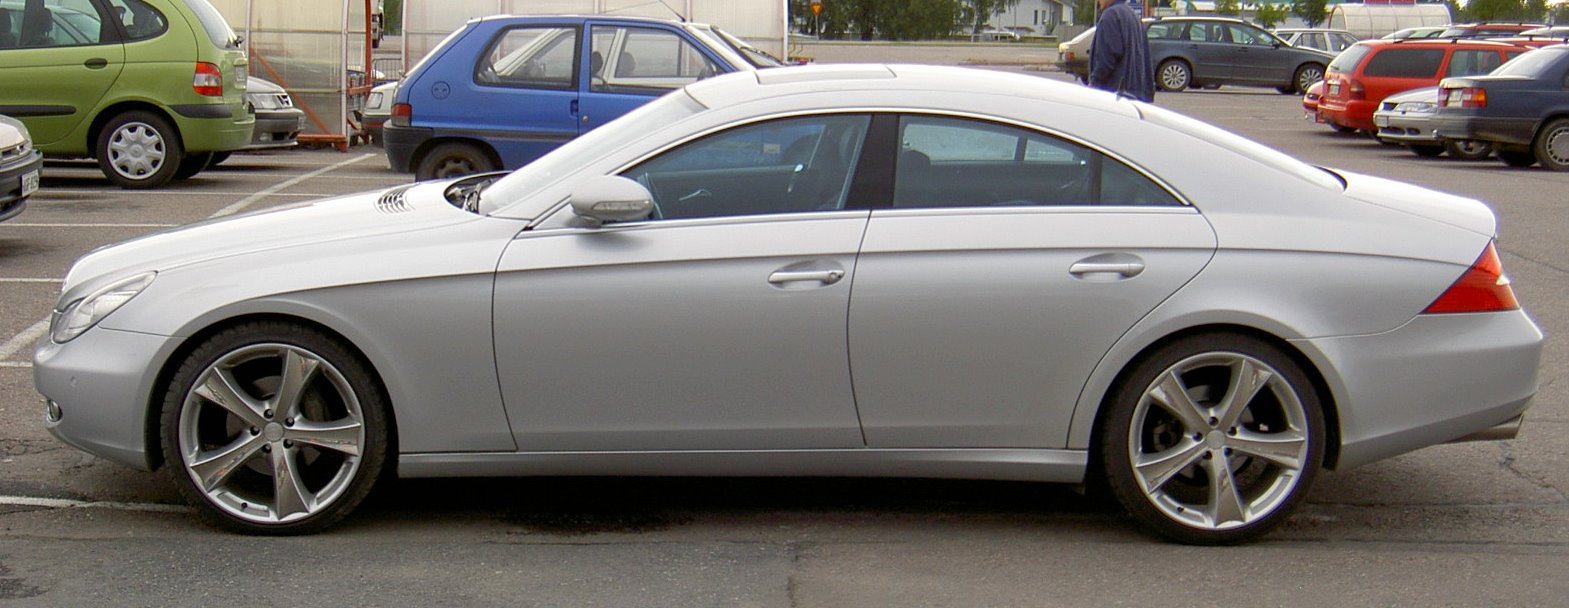 File:Mercedes-Benz CLS 320 CDI .jpg - Wikimedia Commons